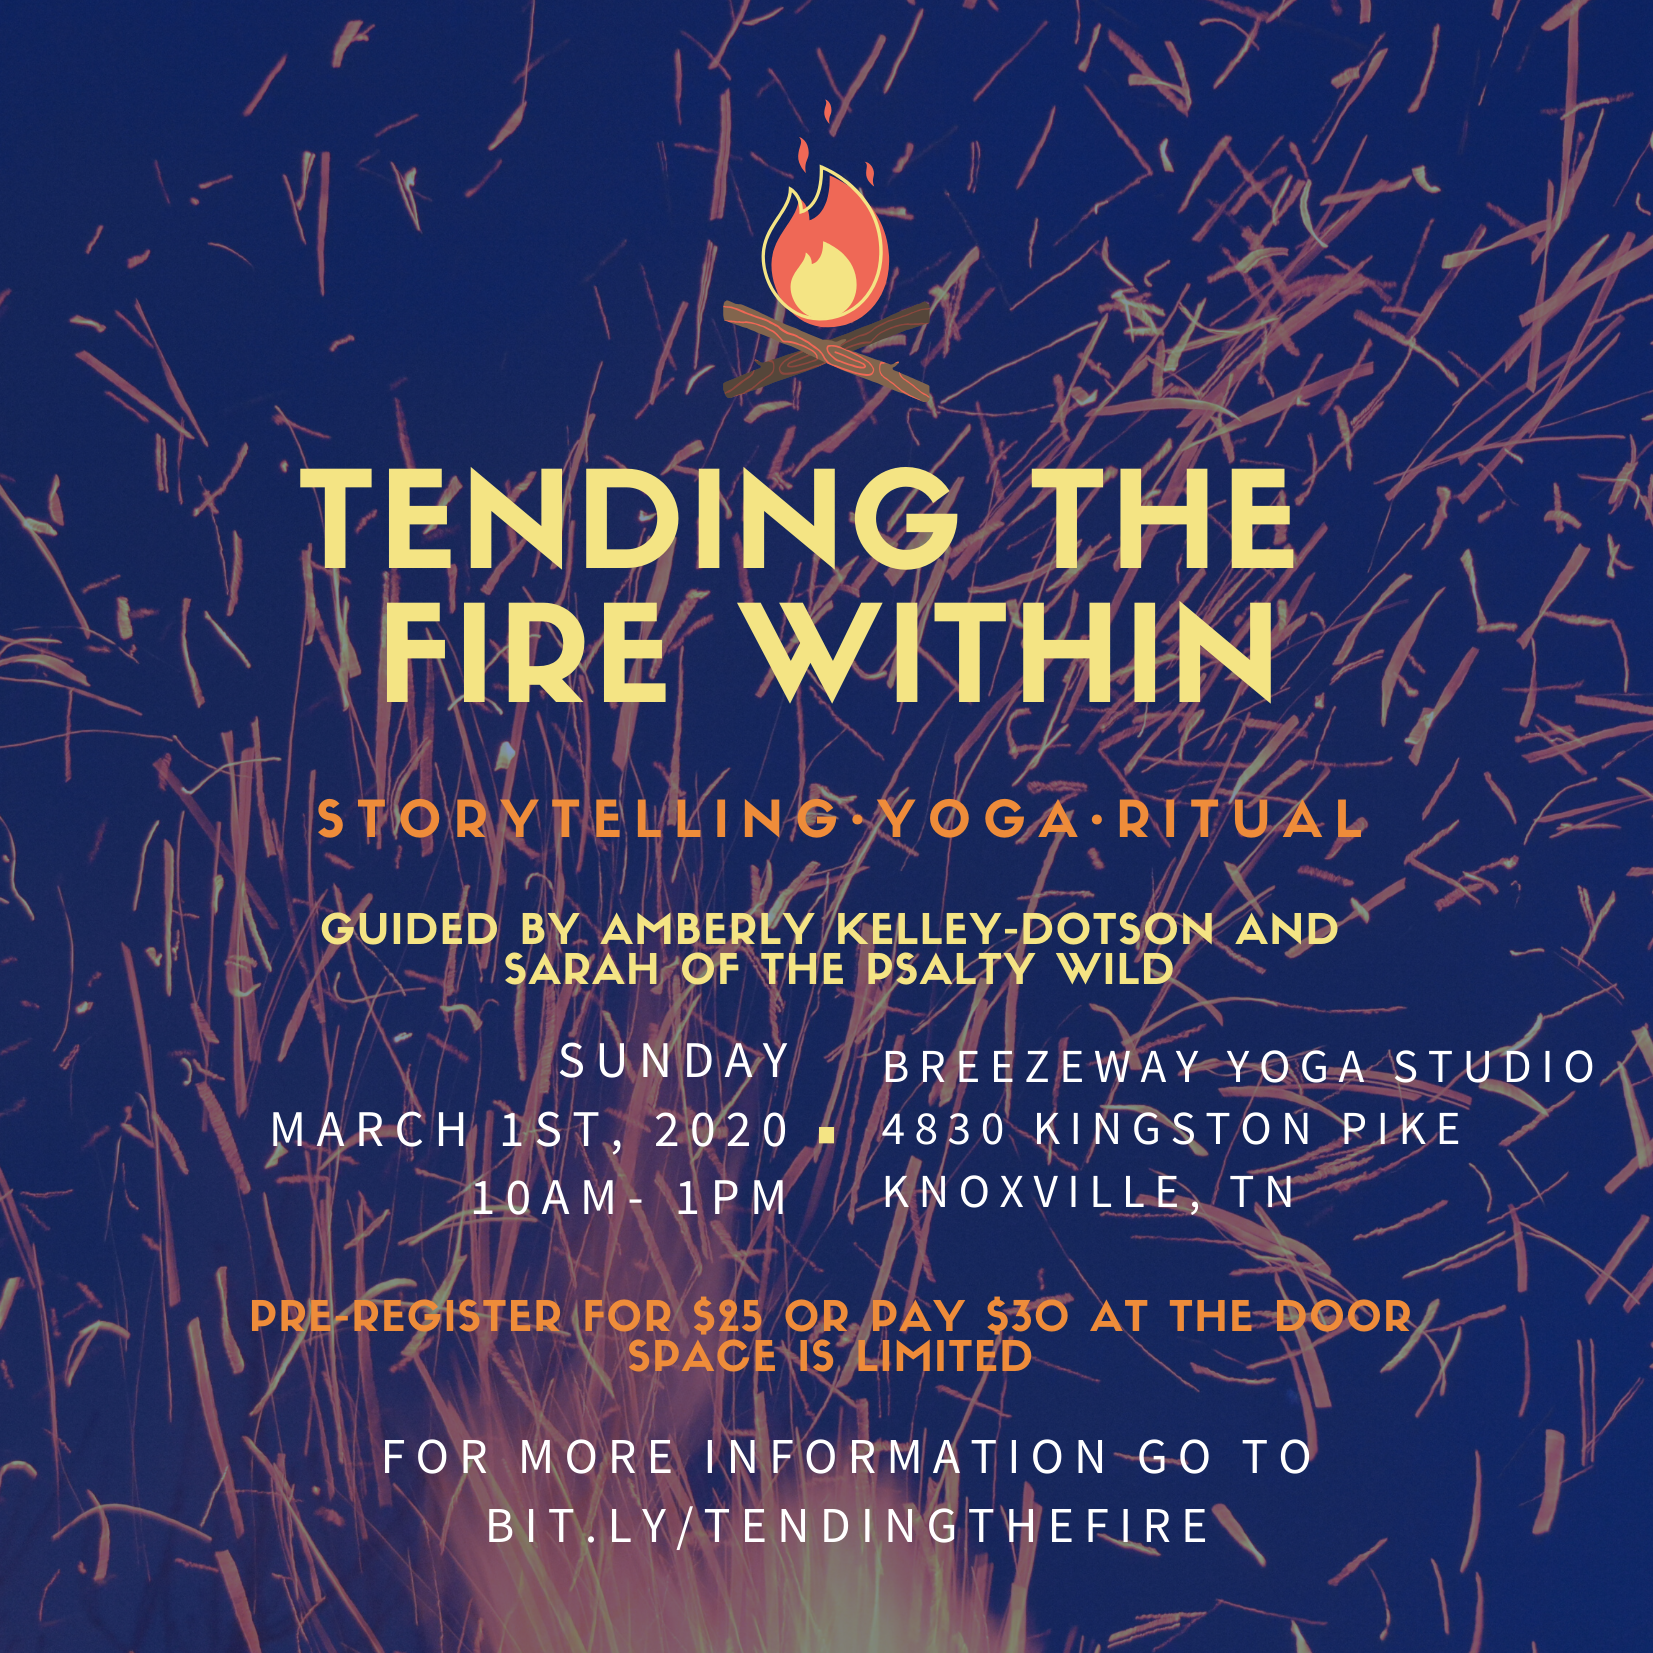 Tending The Fire Within: Storytelling * Yoga * Ritual